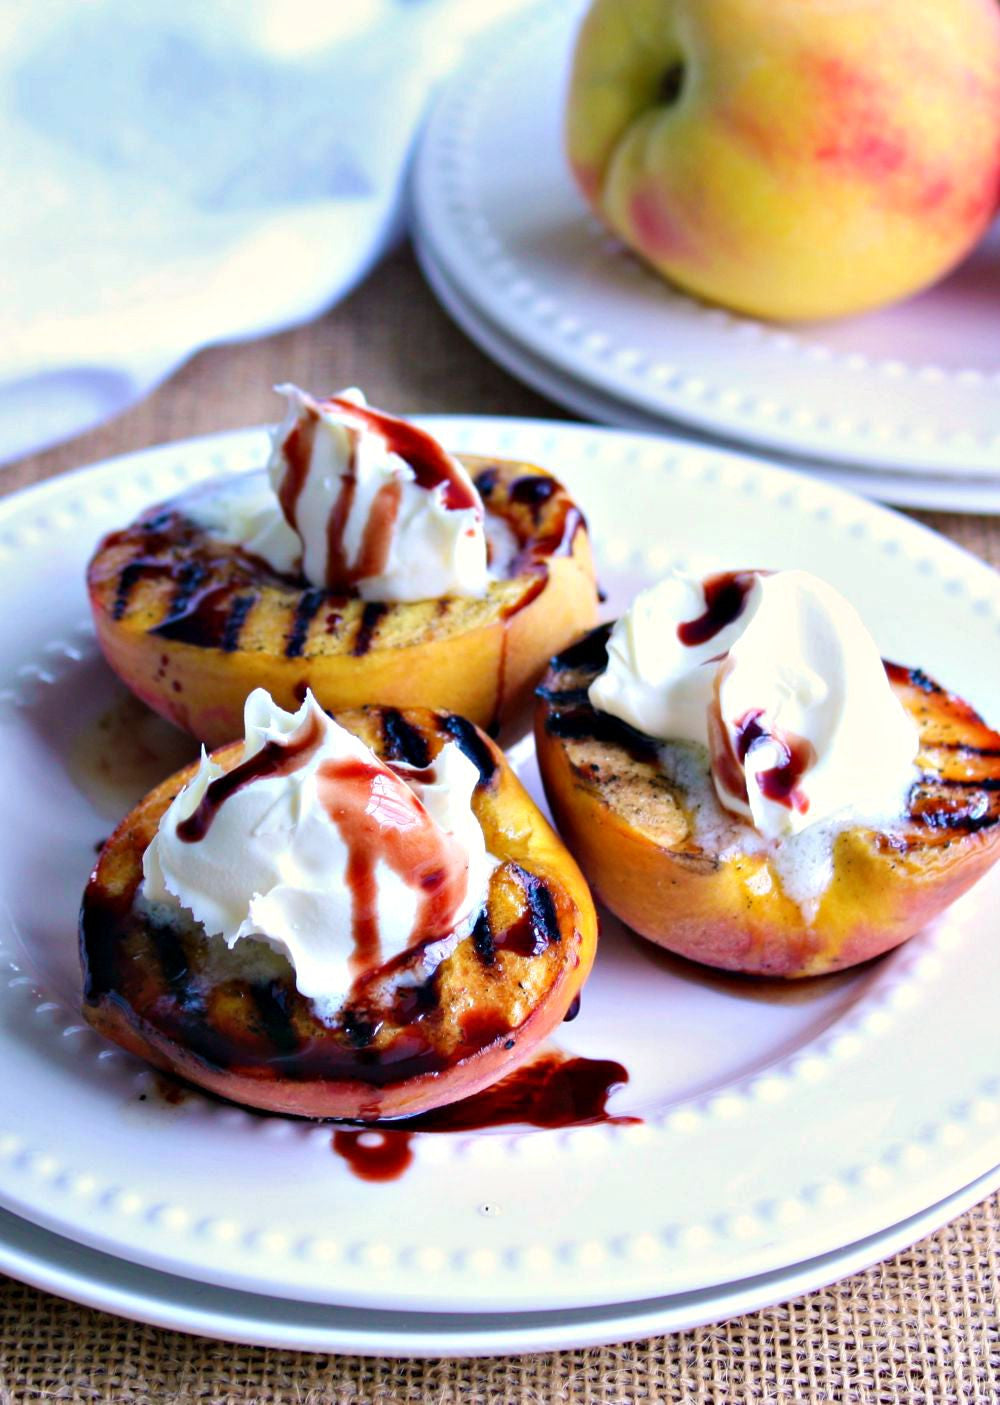 Grilled Peaches Balsamic Sauce | Wozz! Kitchen Creations